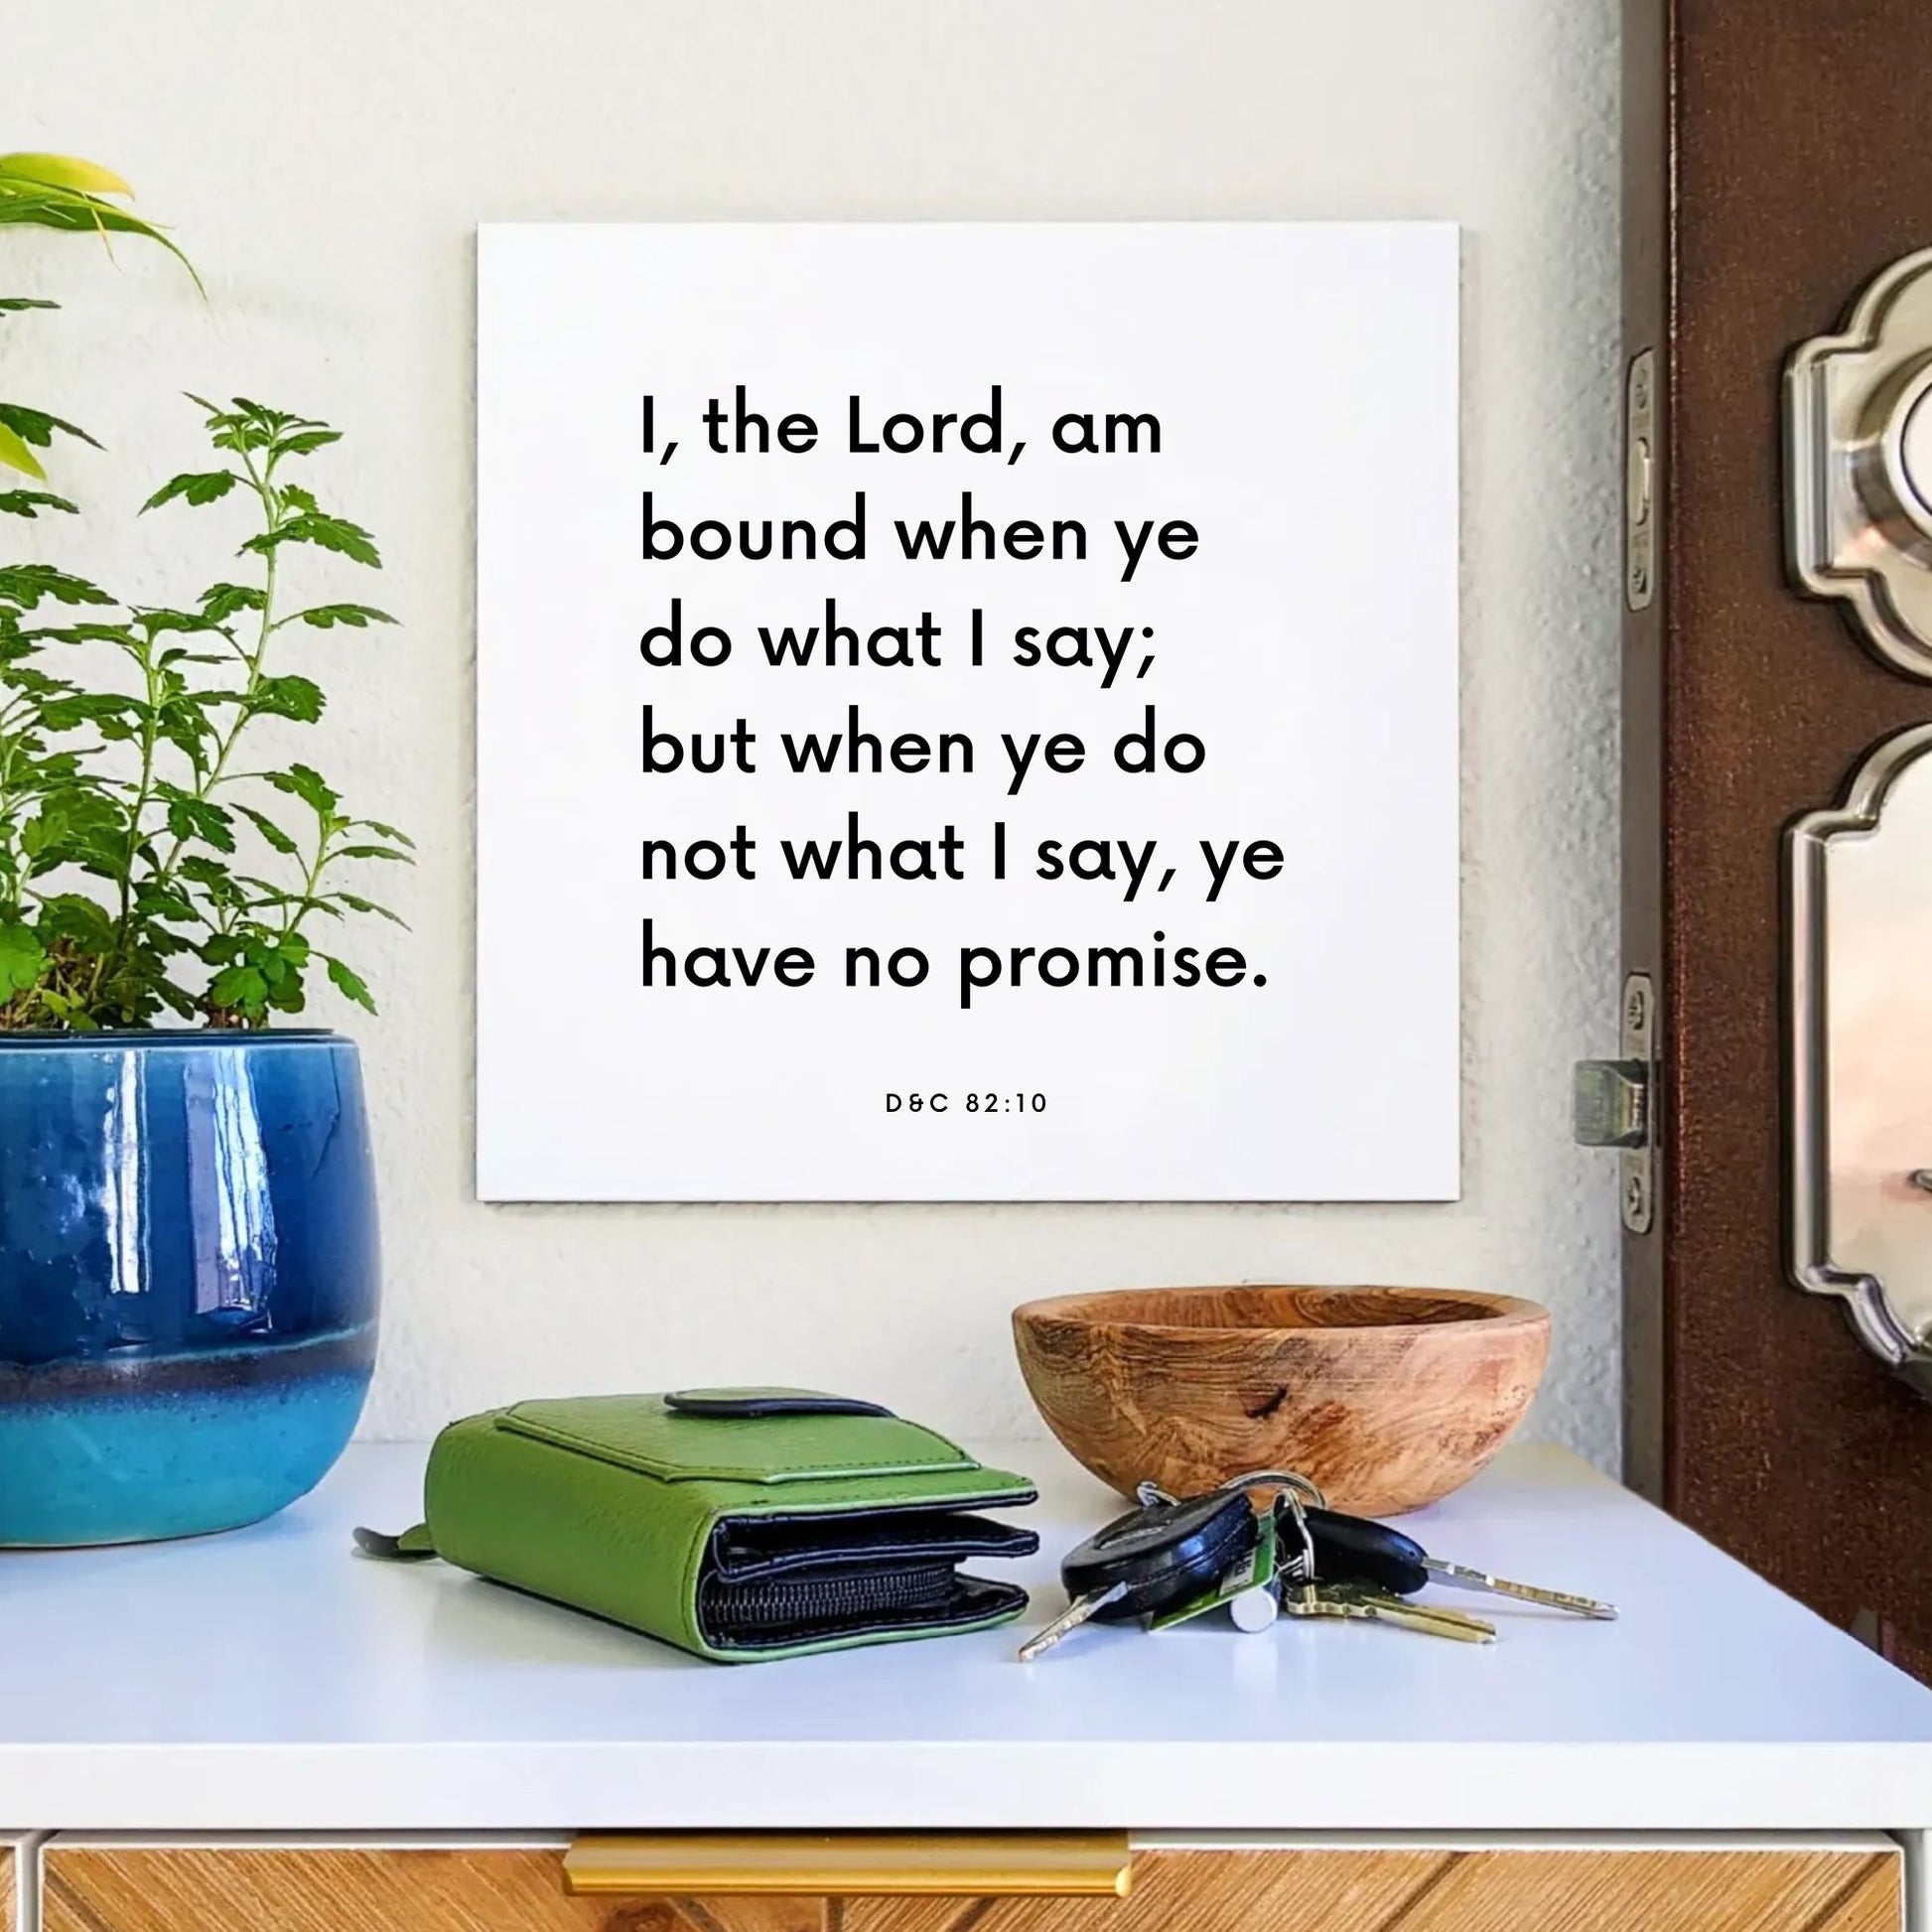 Entryway mouting of the scripture tile for D&C 82:10 - "I, the Lord, am bound when ye do what I say"